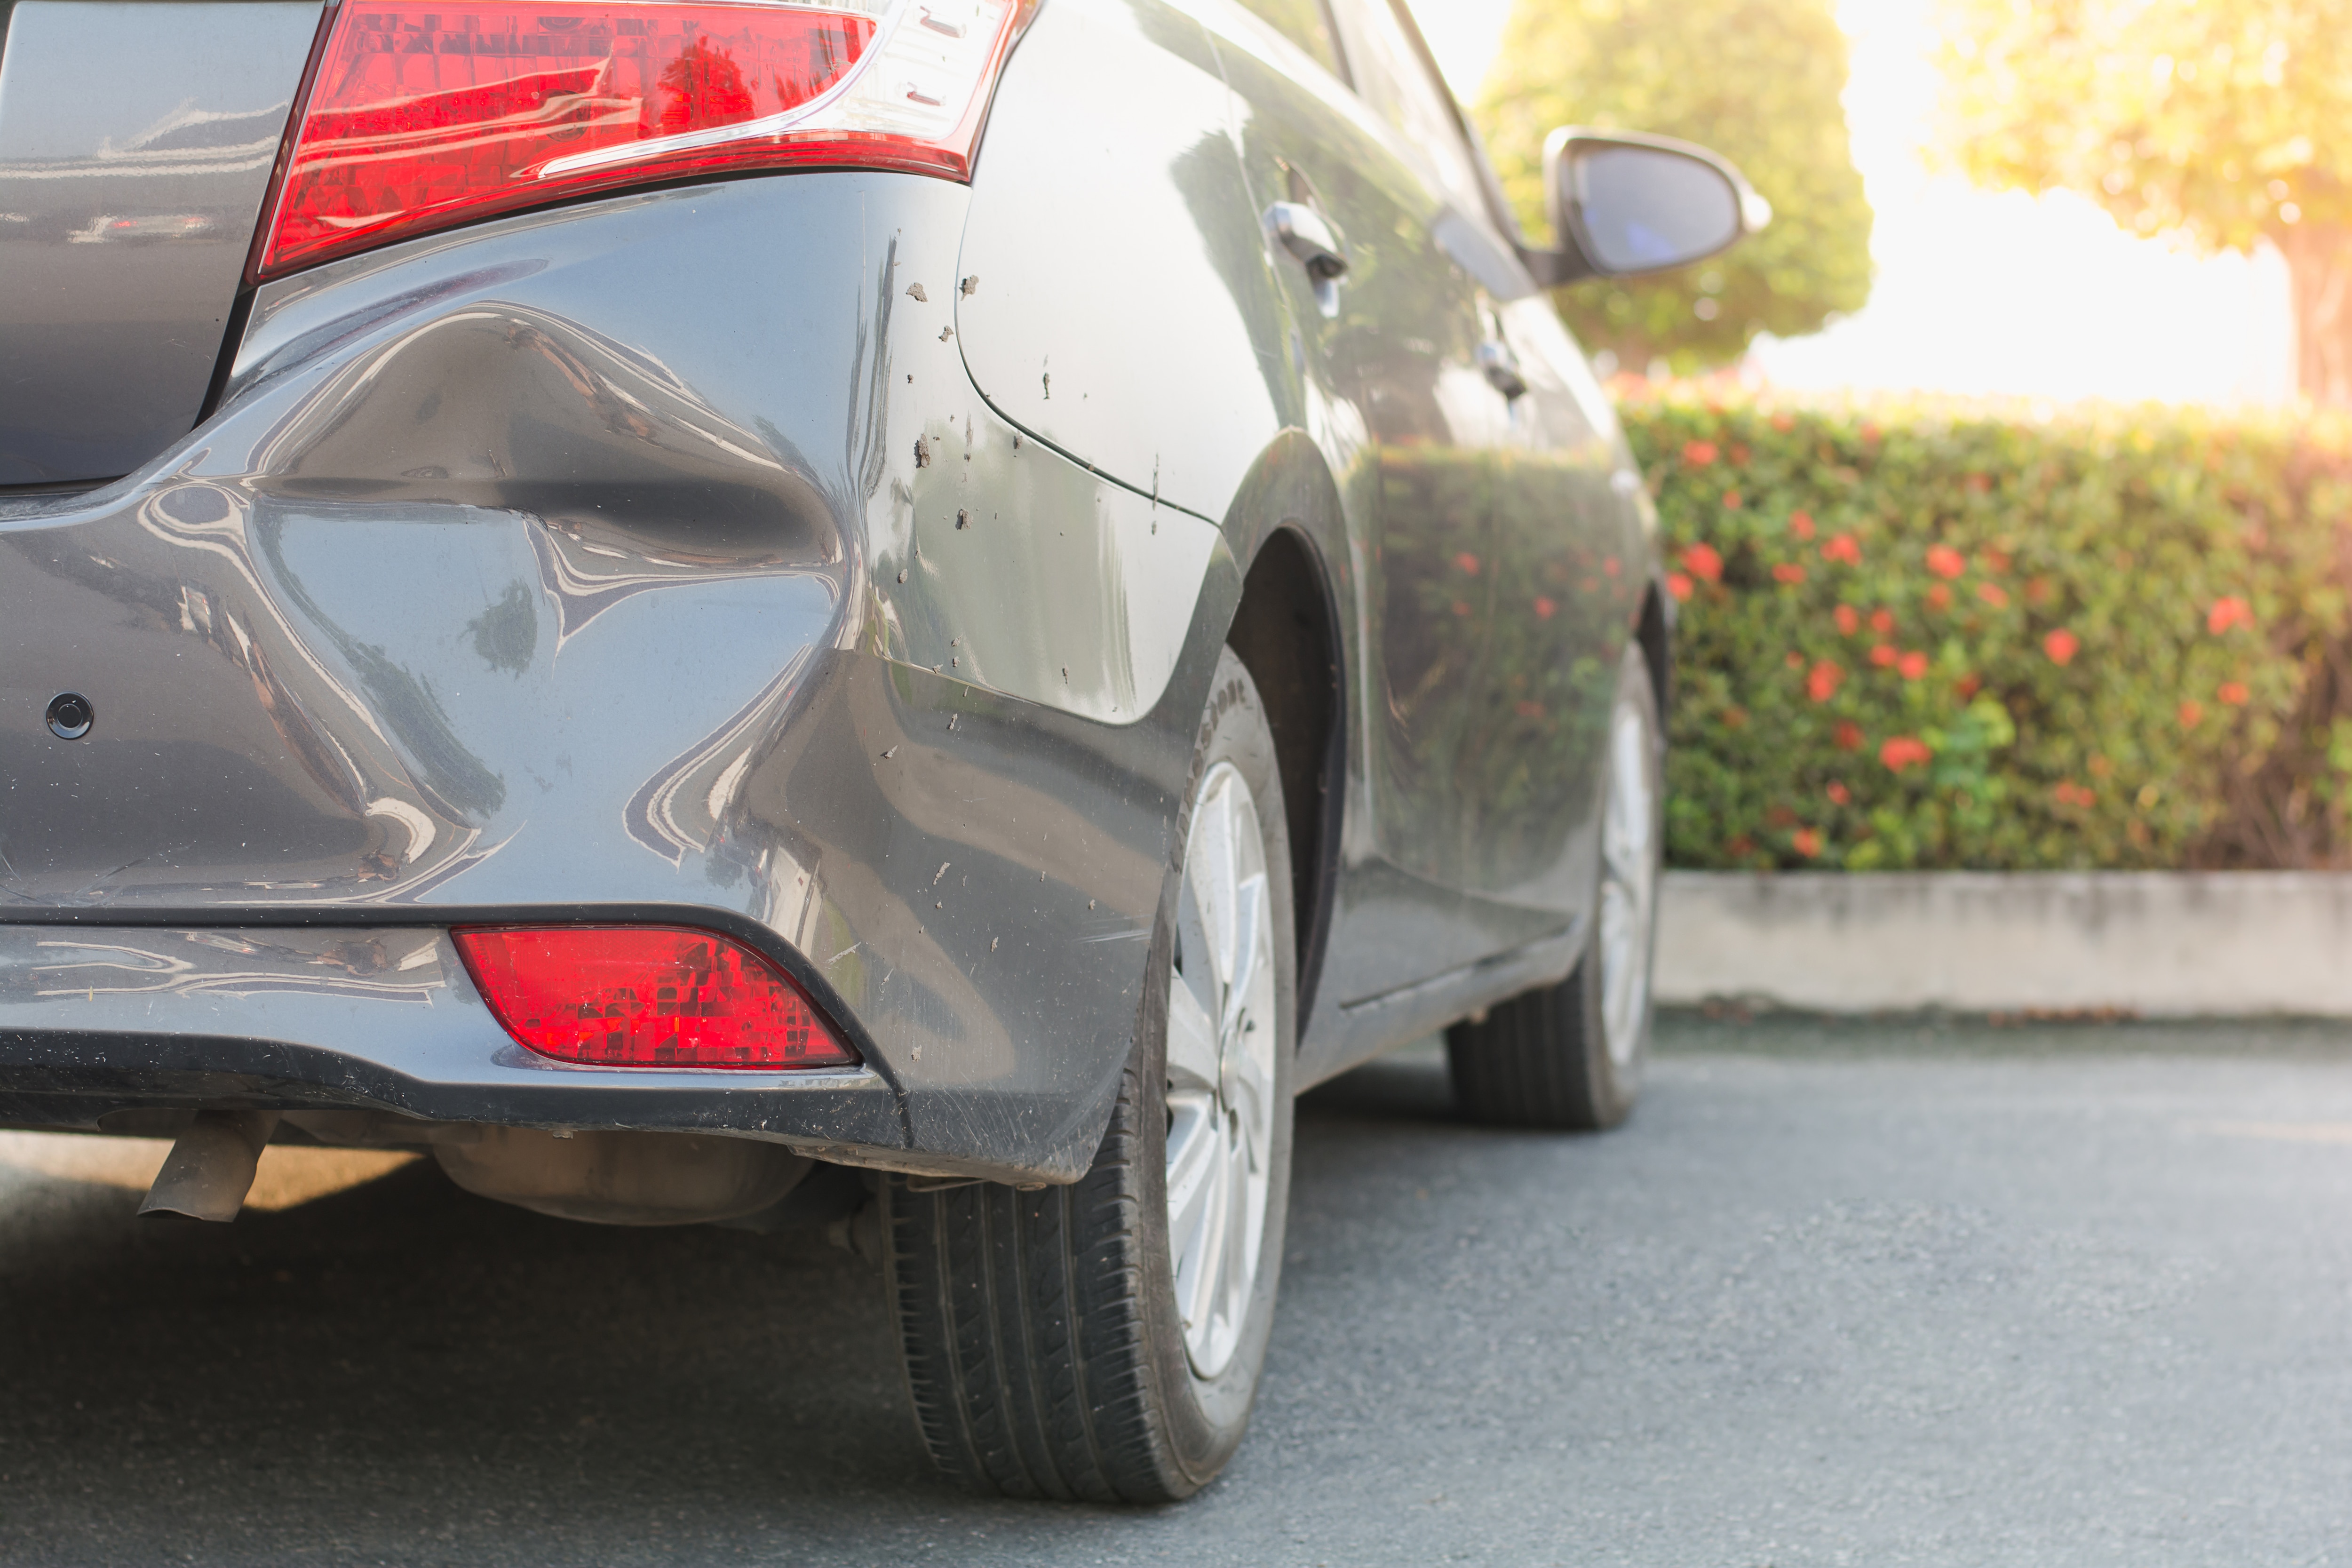 How to Fix Car Dents: Options and Costs to Consider